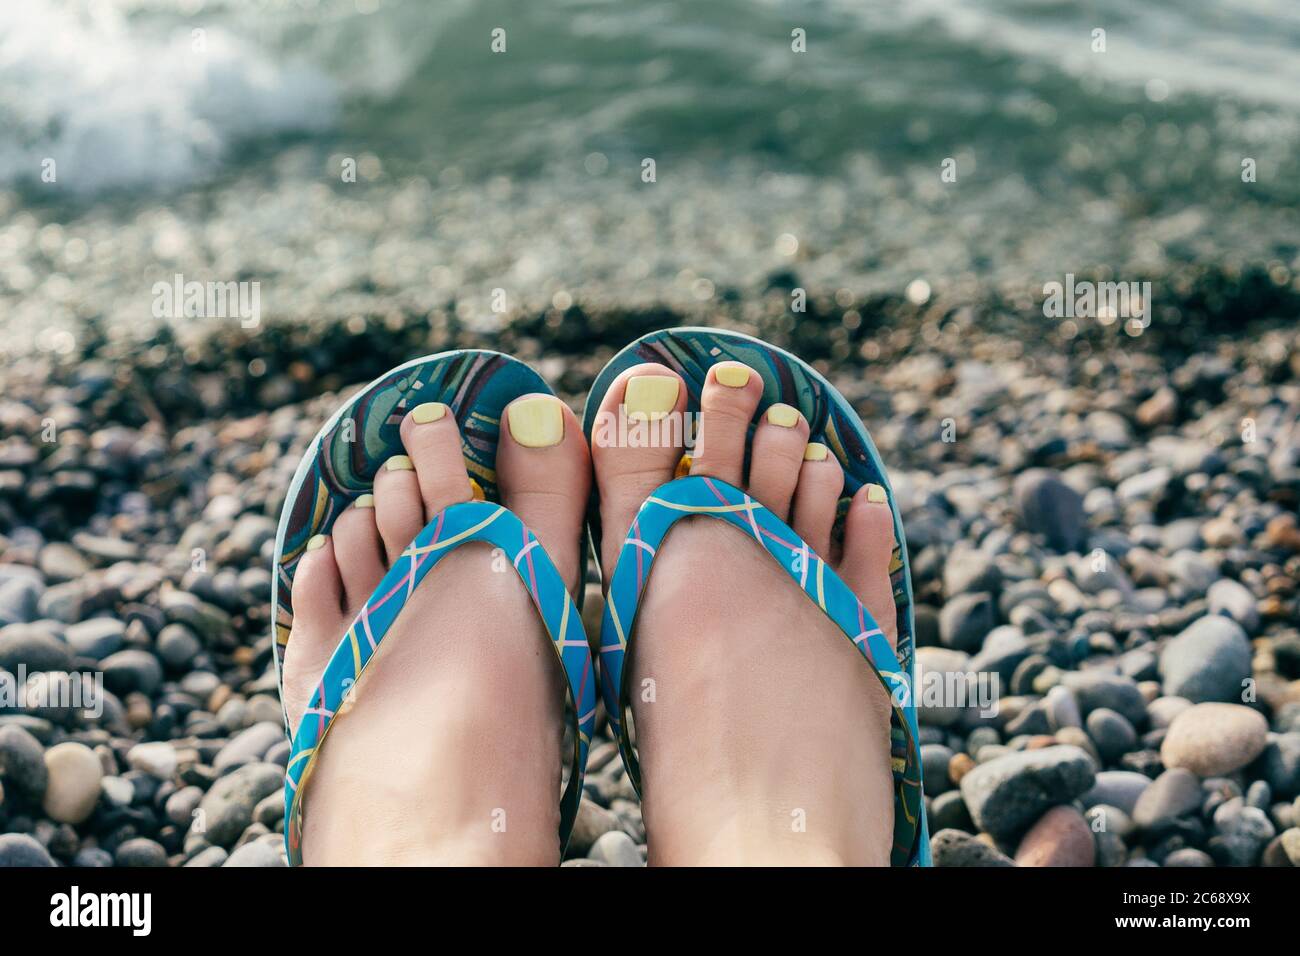 Female legs in blue flip flops shoes with perfect yellow pedicure